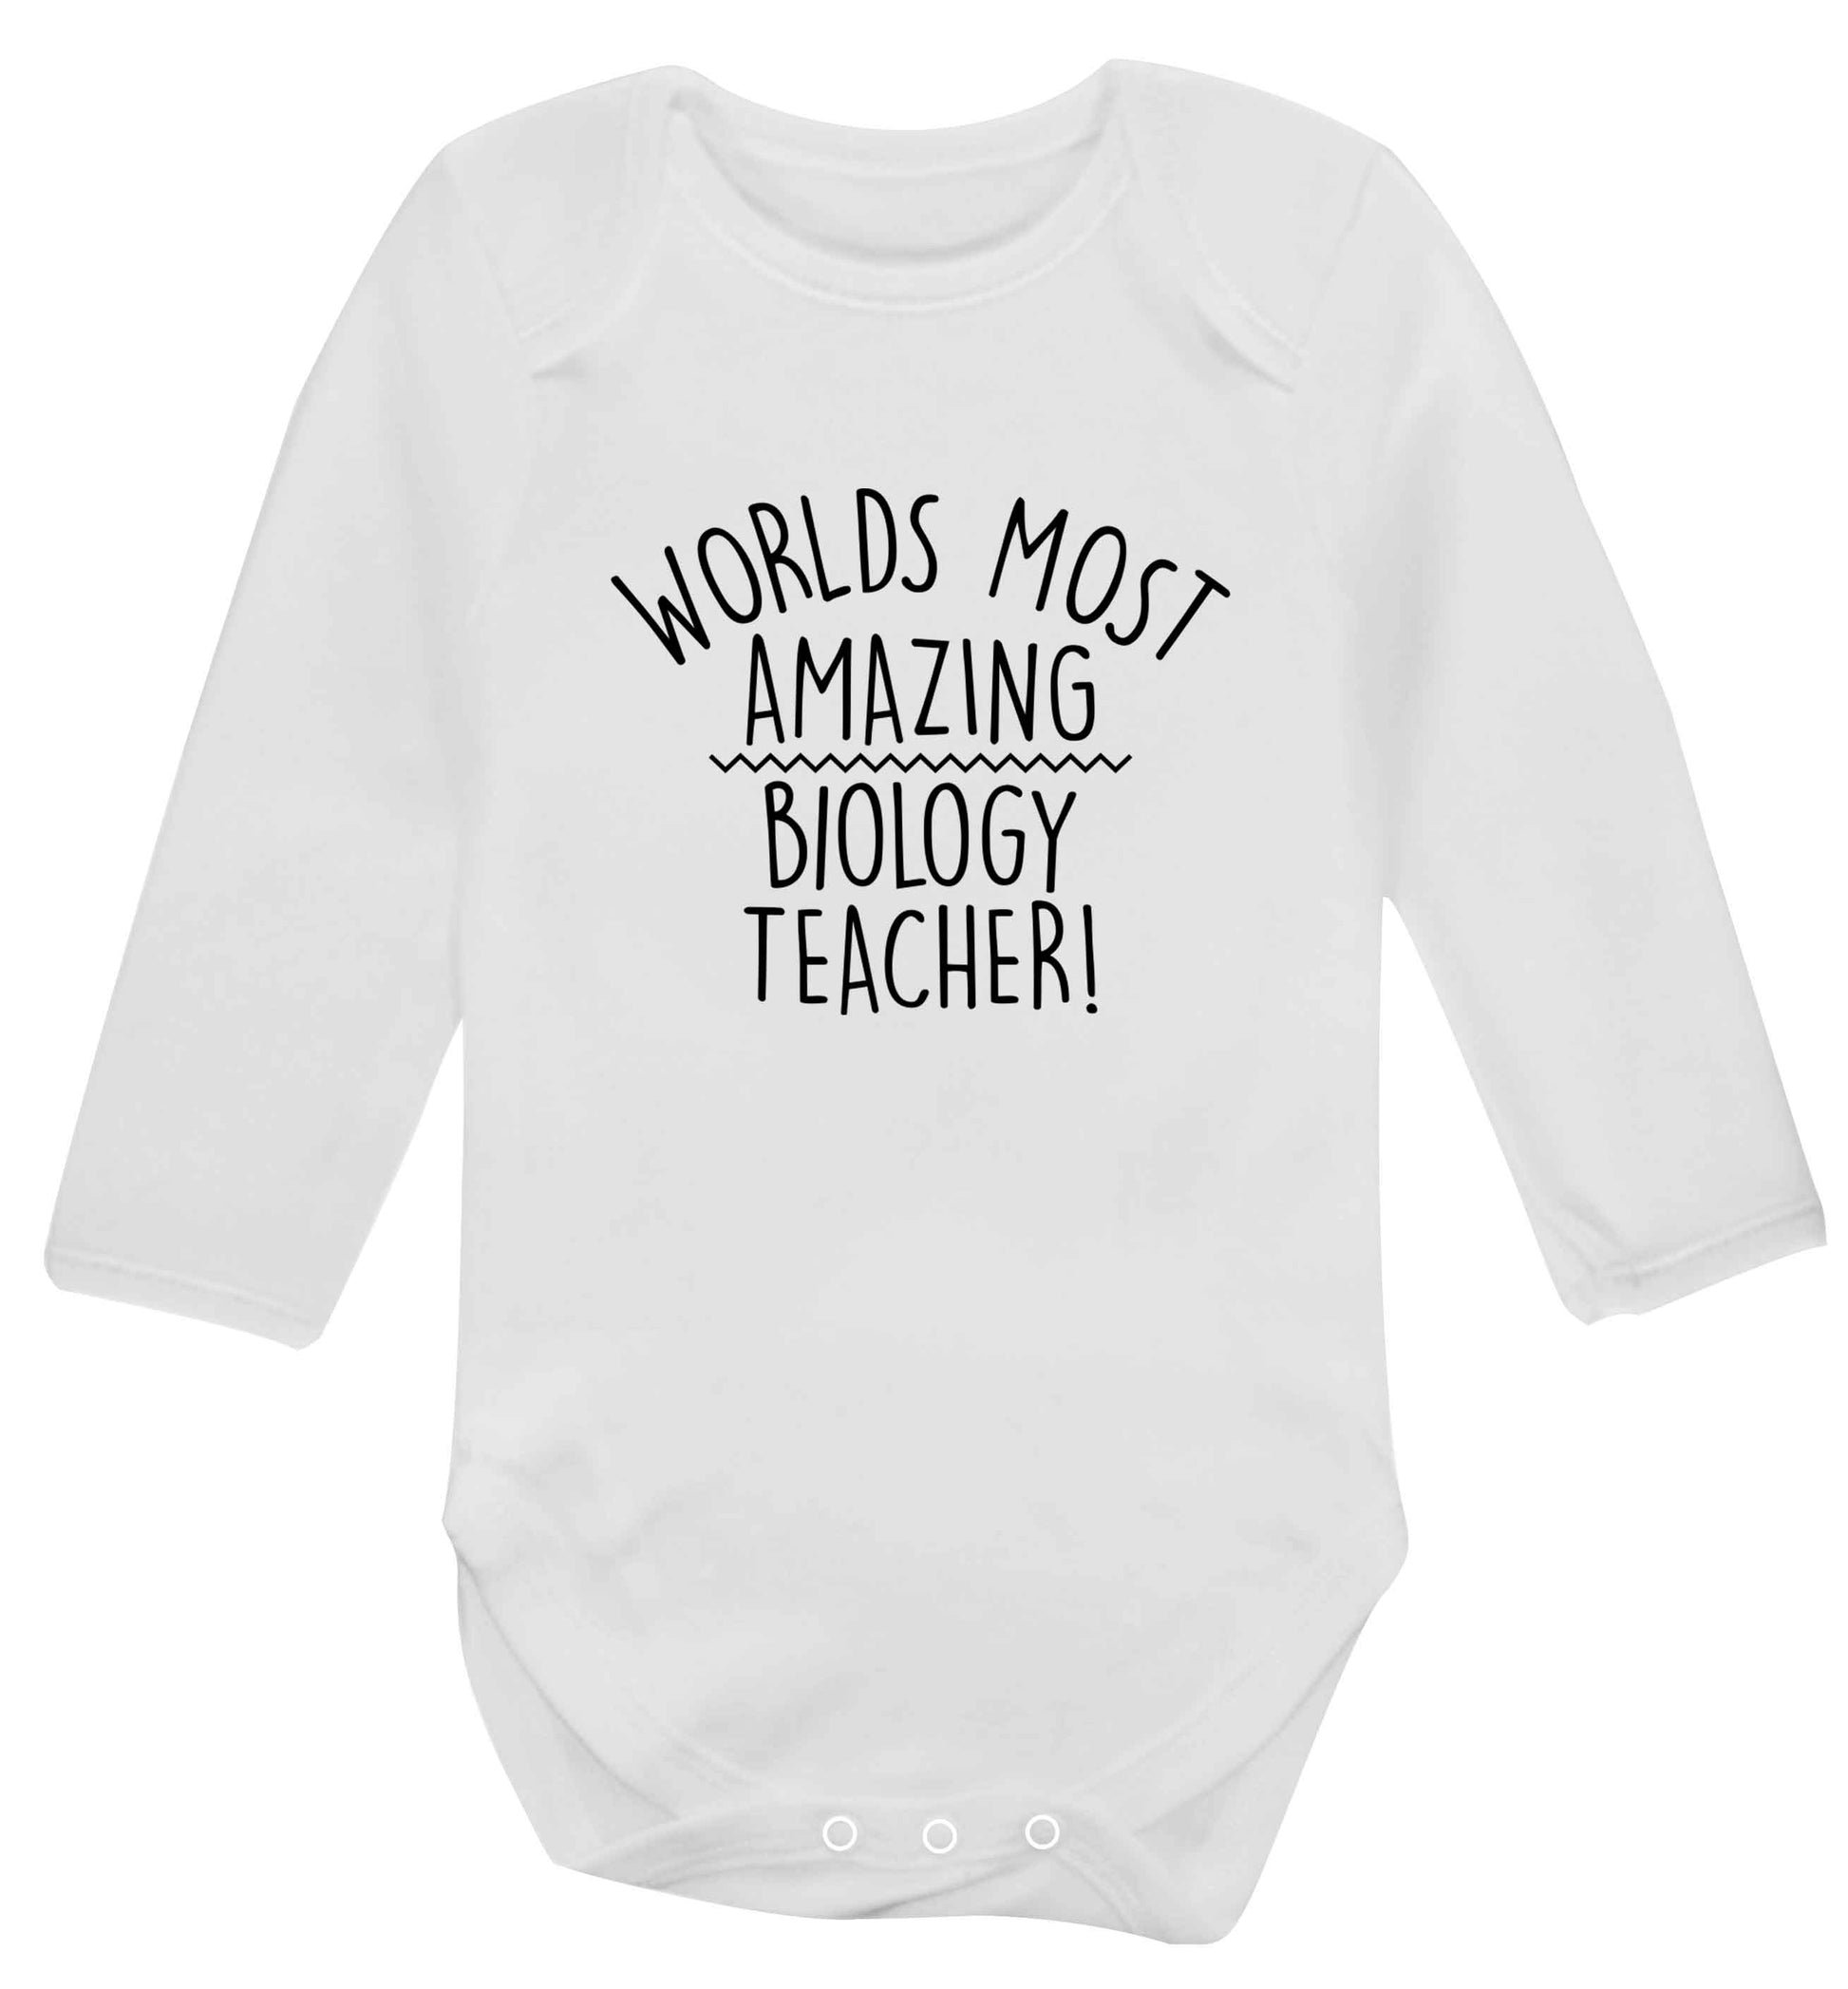 Worlds most amazing biology teacher baby vest long sleeved white 6-12 months